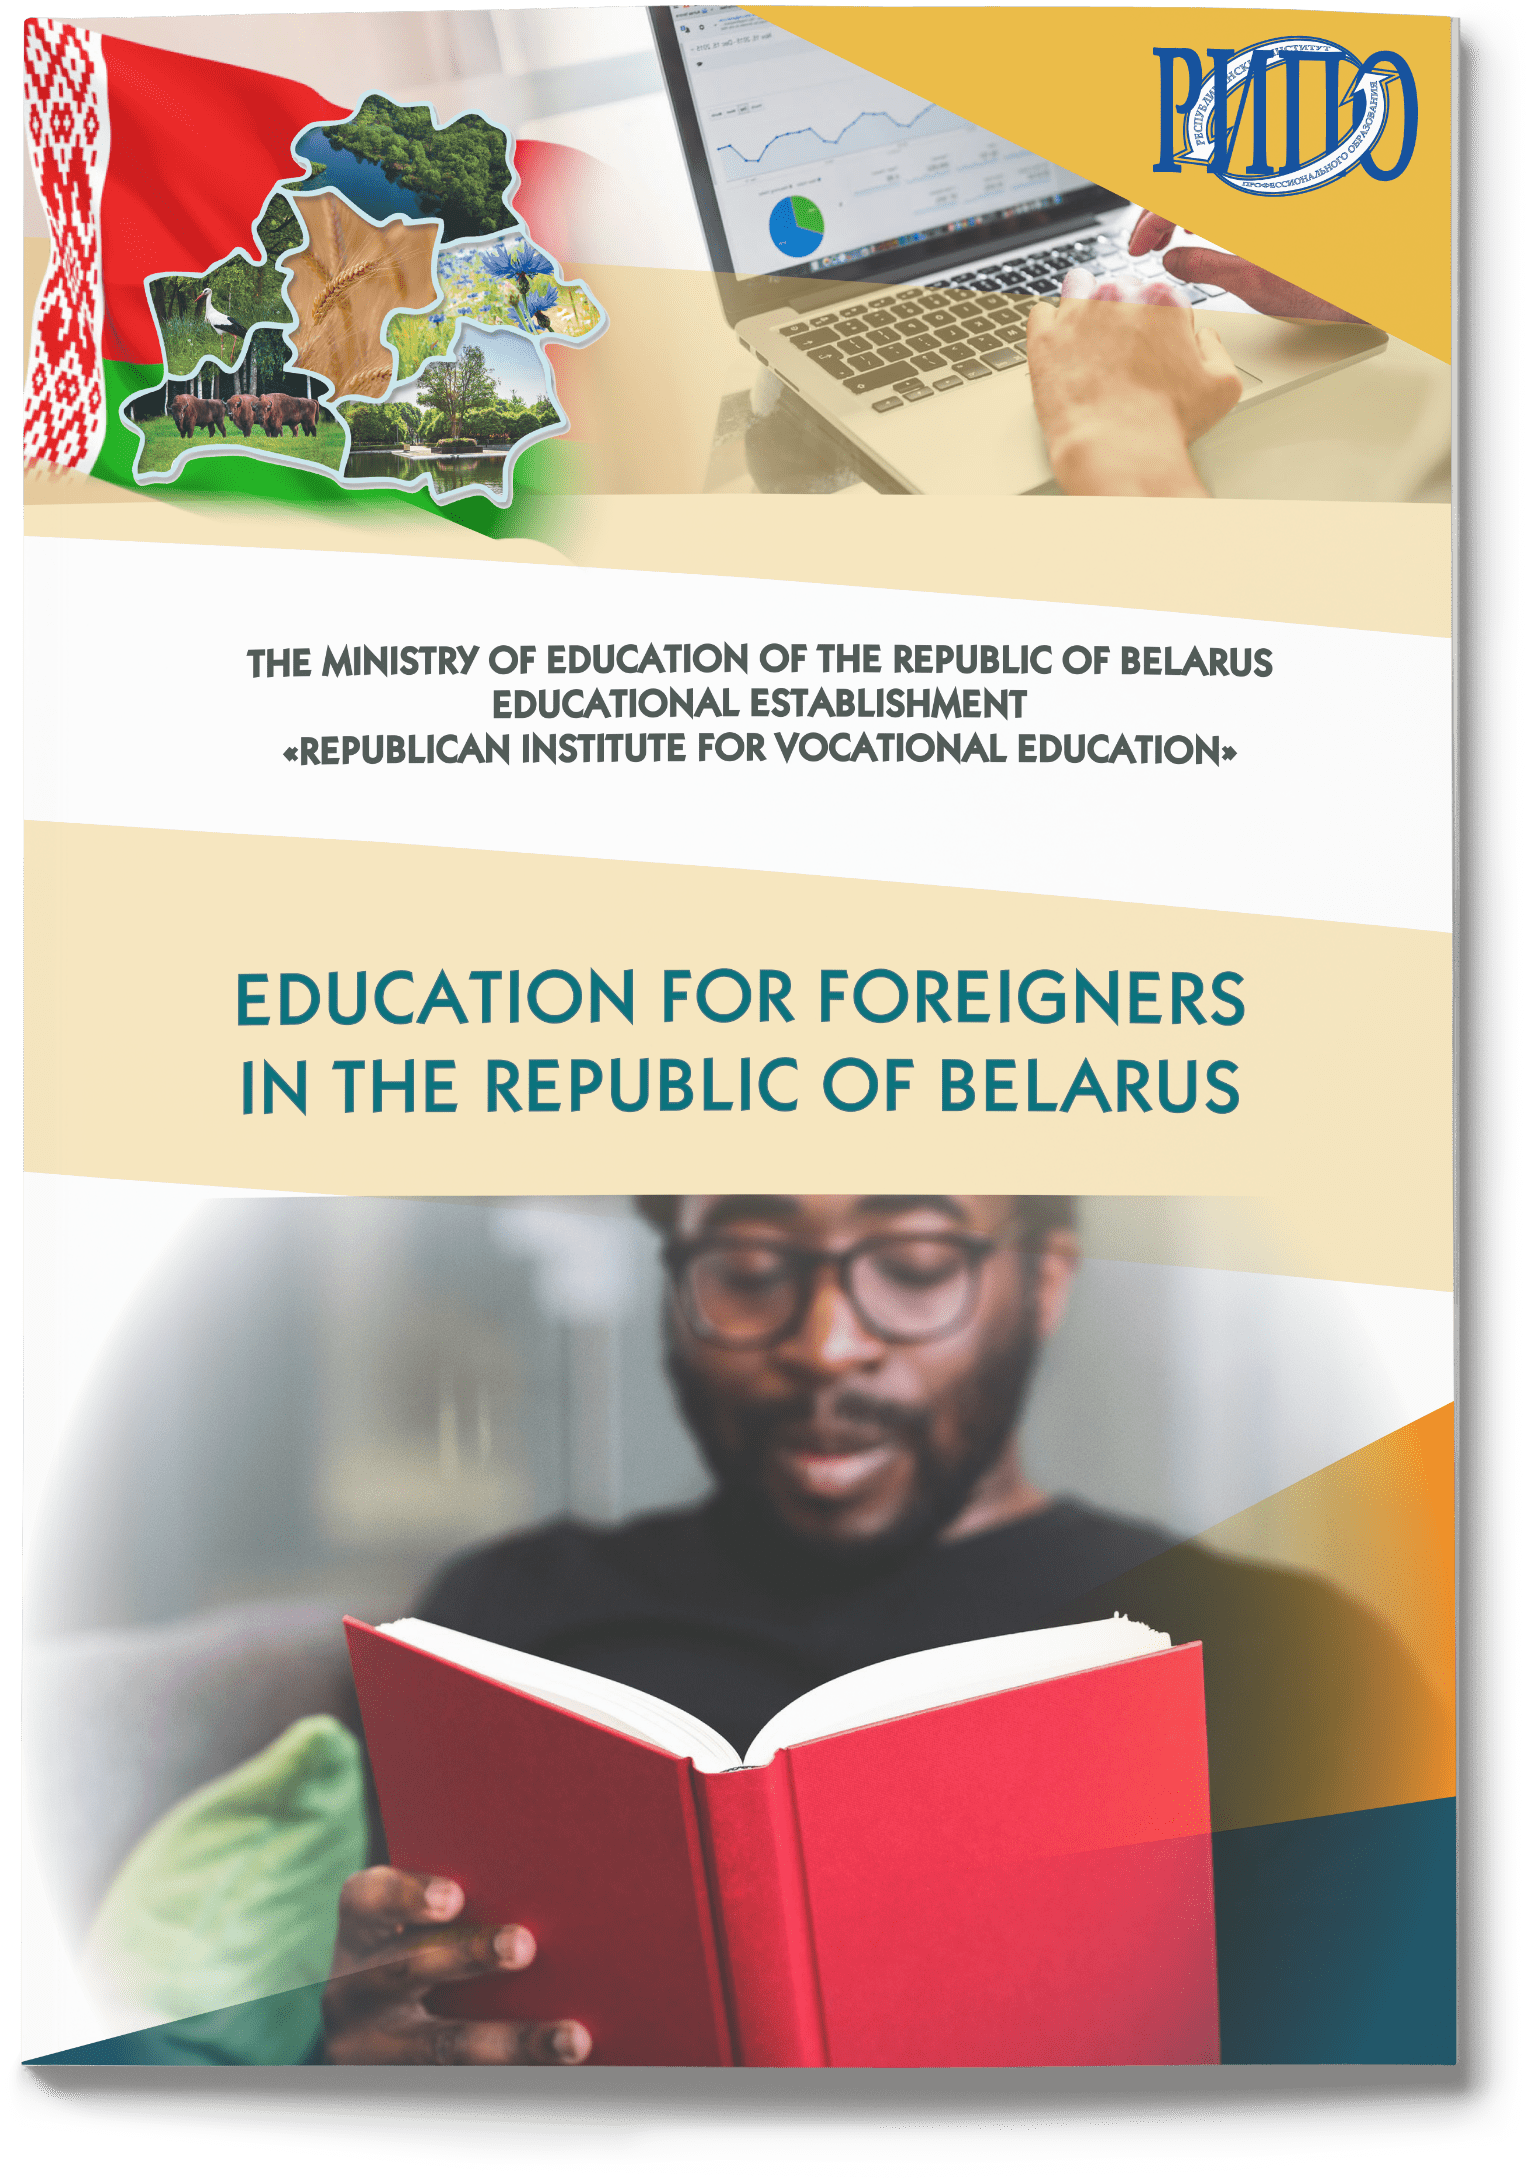 Education for foreigners
in the Republic of Belarus